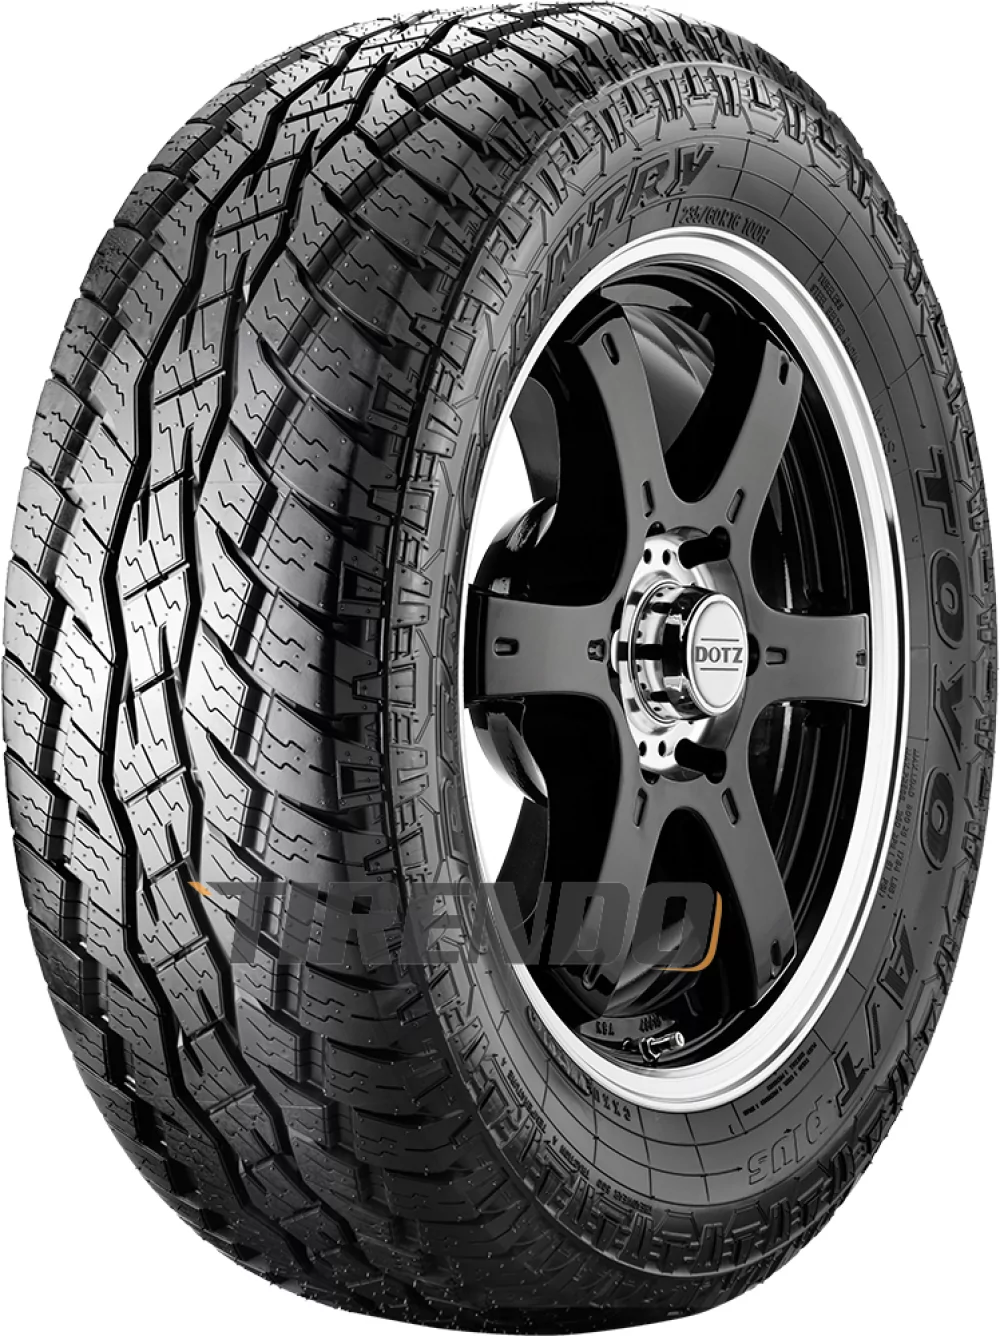 Toyo Open Country A/T Plus LT265/75R16 119/116S